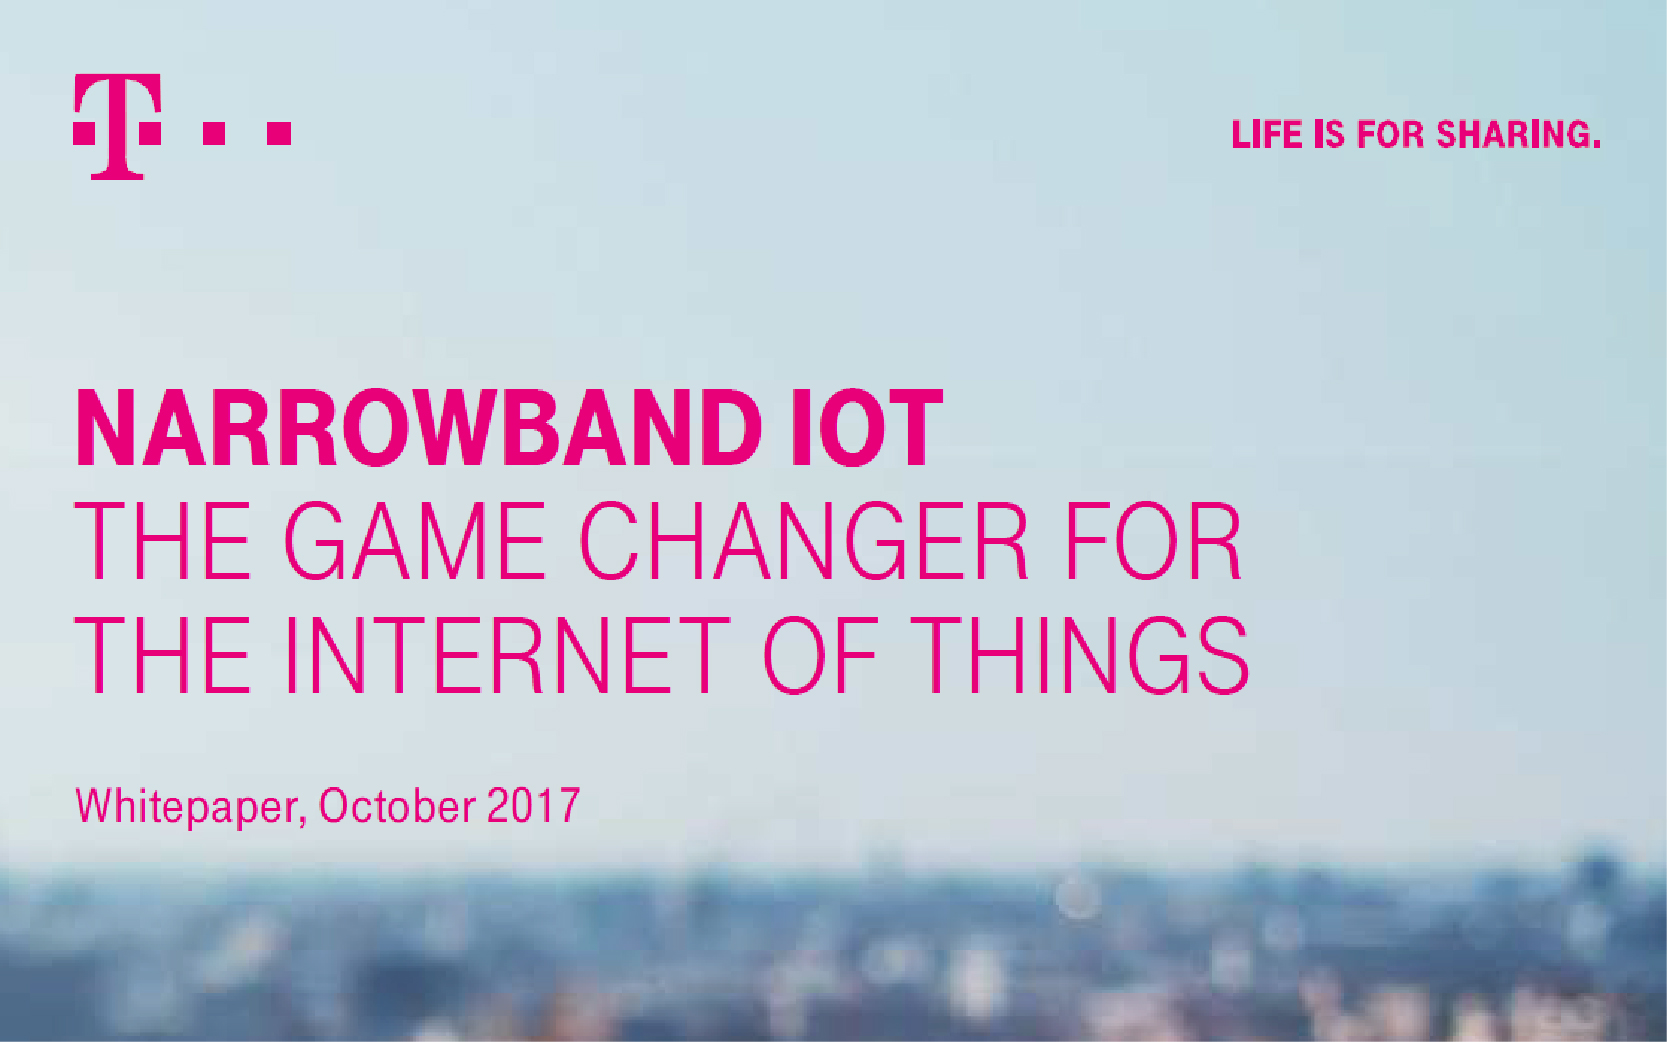 Telekom’s whitepaper on NarrowBand IoT (NB-IoT) communication technology: technical capabilities, use cases and future expectations